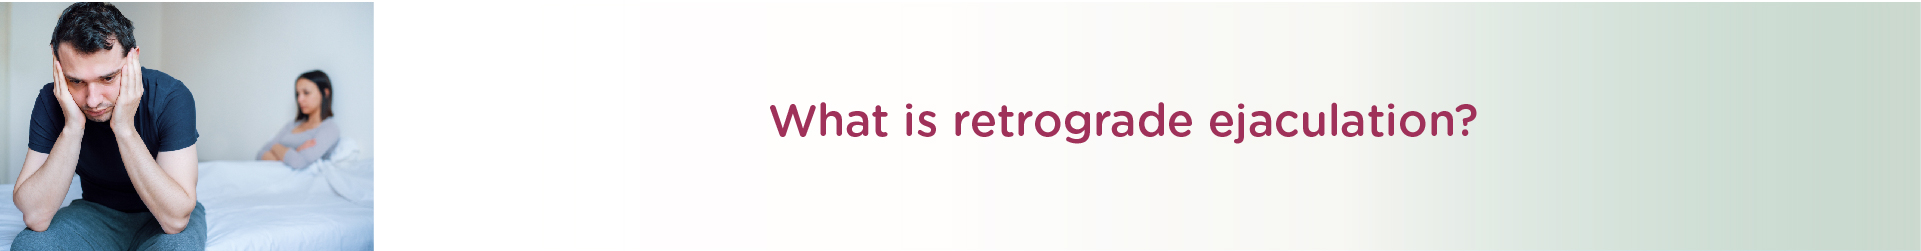 What is Retrograde Ejaculation?